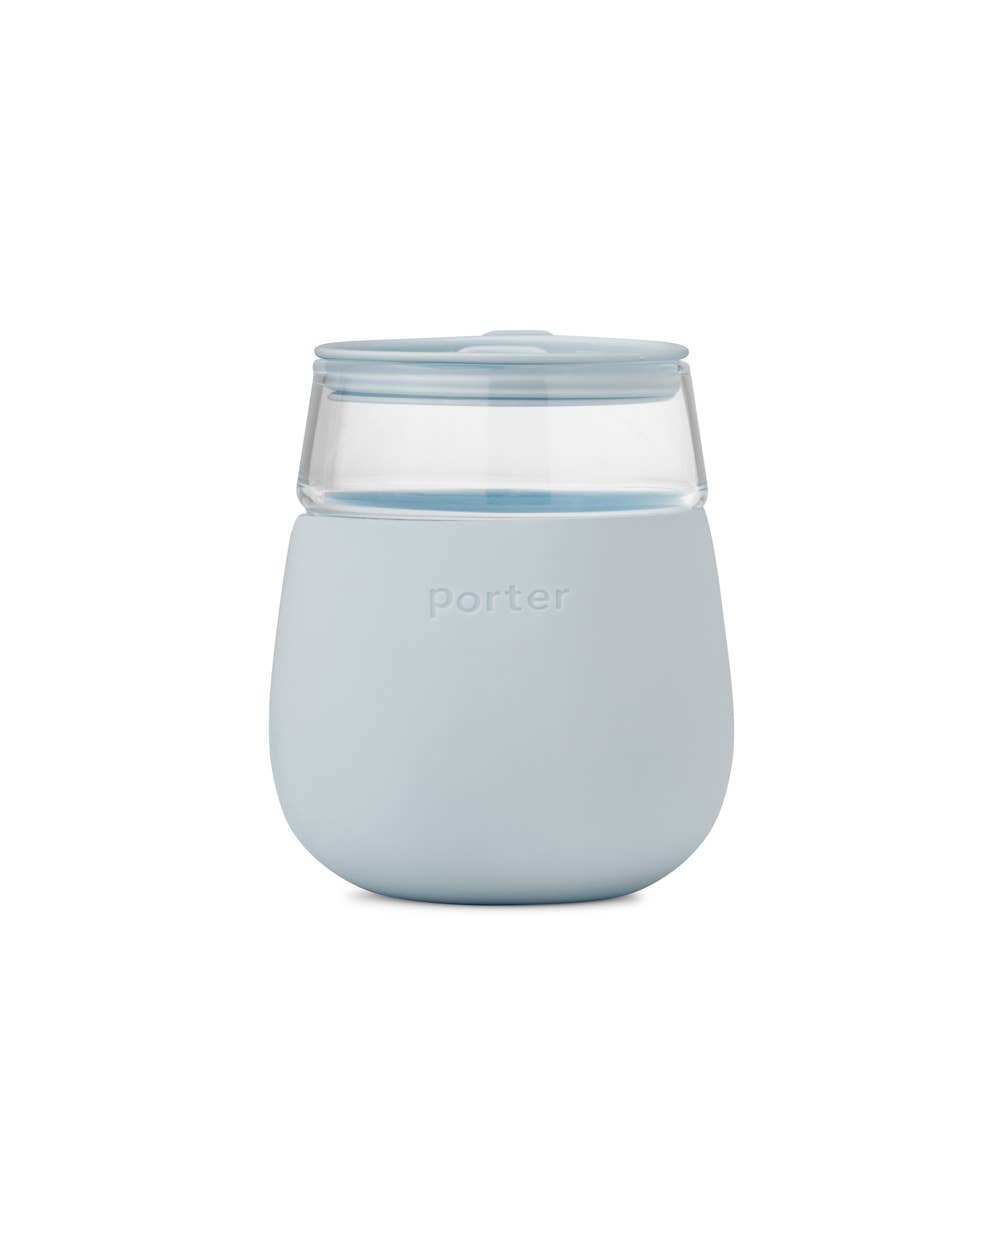 Porter Wine & Drink Glass Cup with Silicone Wrap in Charcoal  W&P   -better made easy-eco-friendly-sustainable-gifting